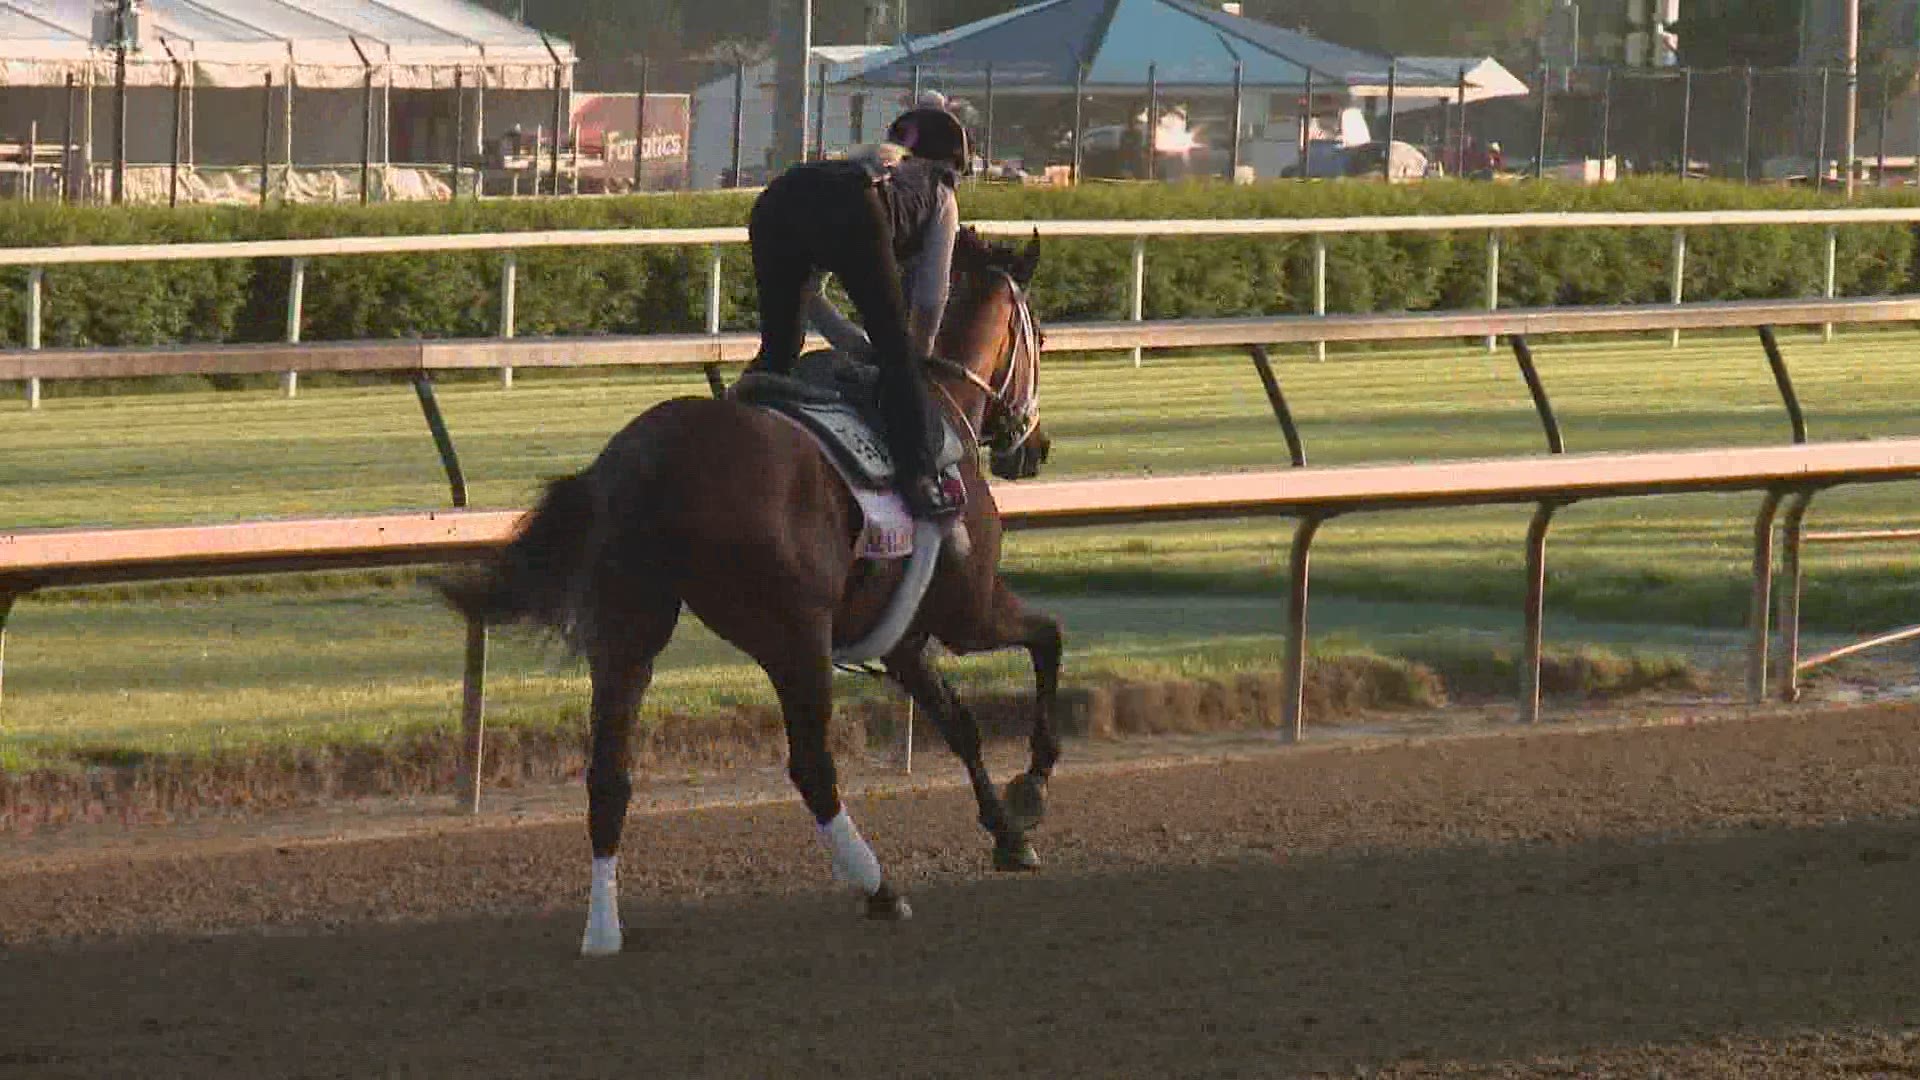 With the greatest two minutes in sports just days away, what does it take to get thoroughbreds in the right mindset? We head to Churchill Downs to find out.